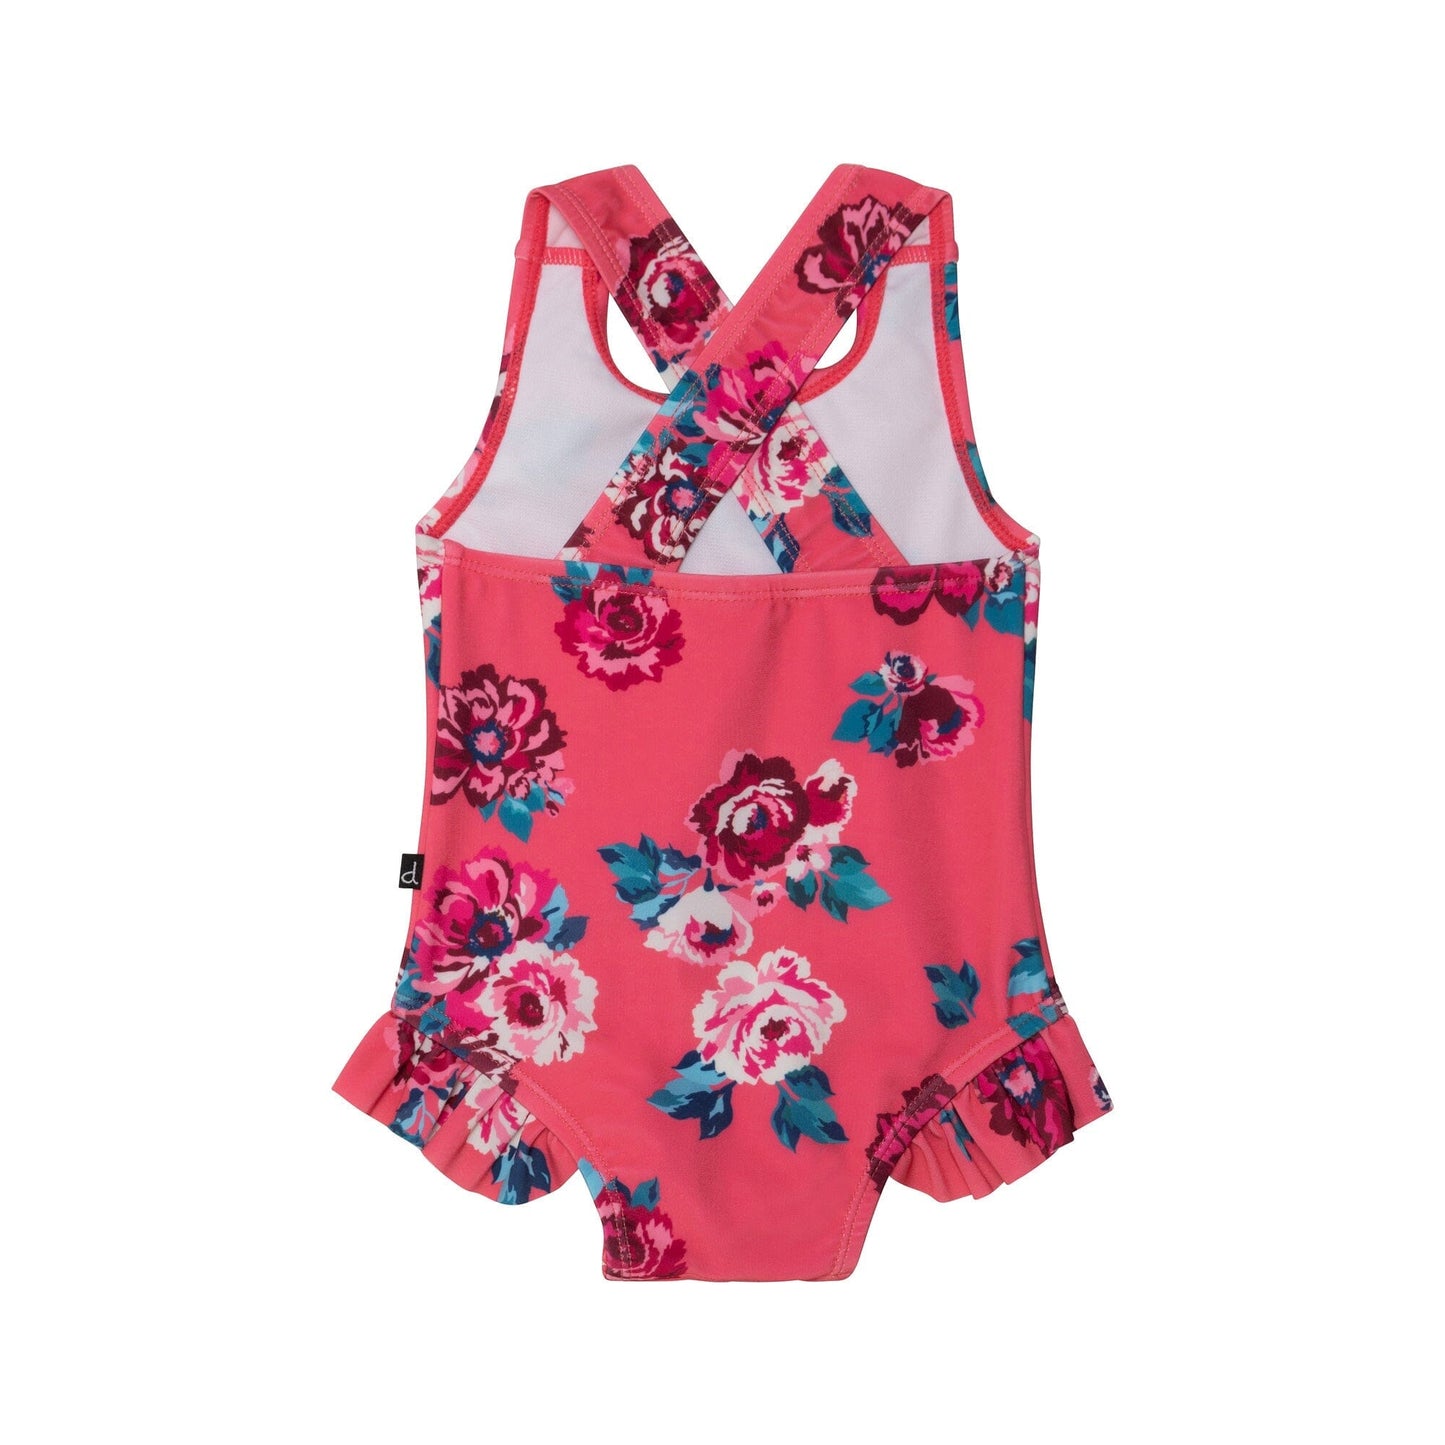 Printed One Piece Bathing Suit Pink Roses - E30NG10_000